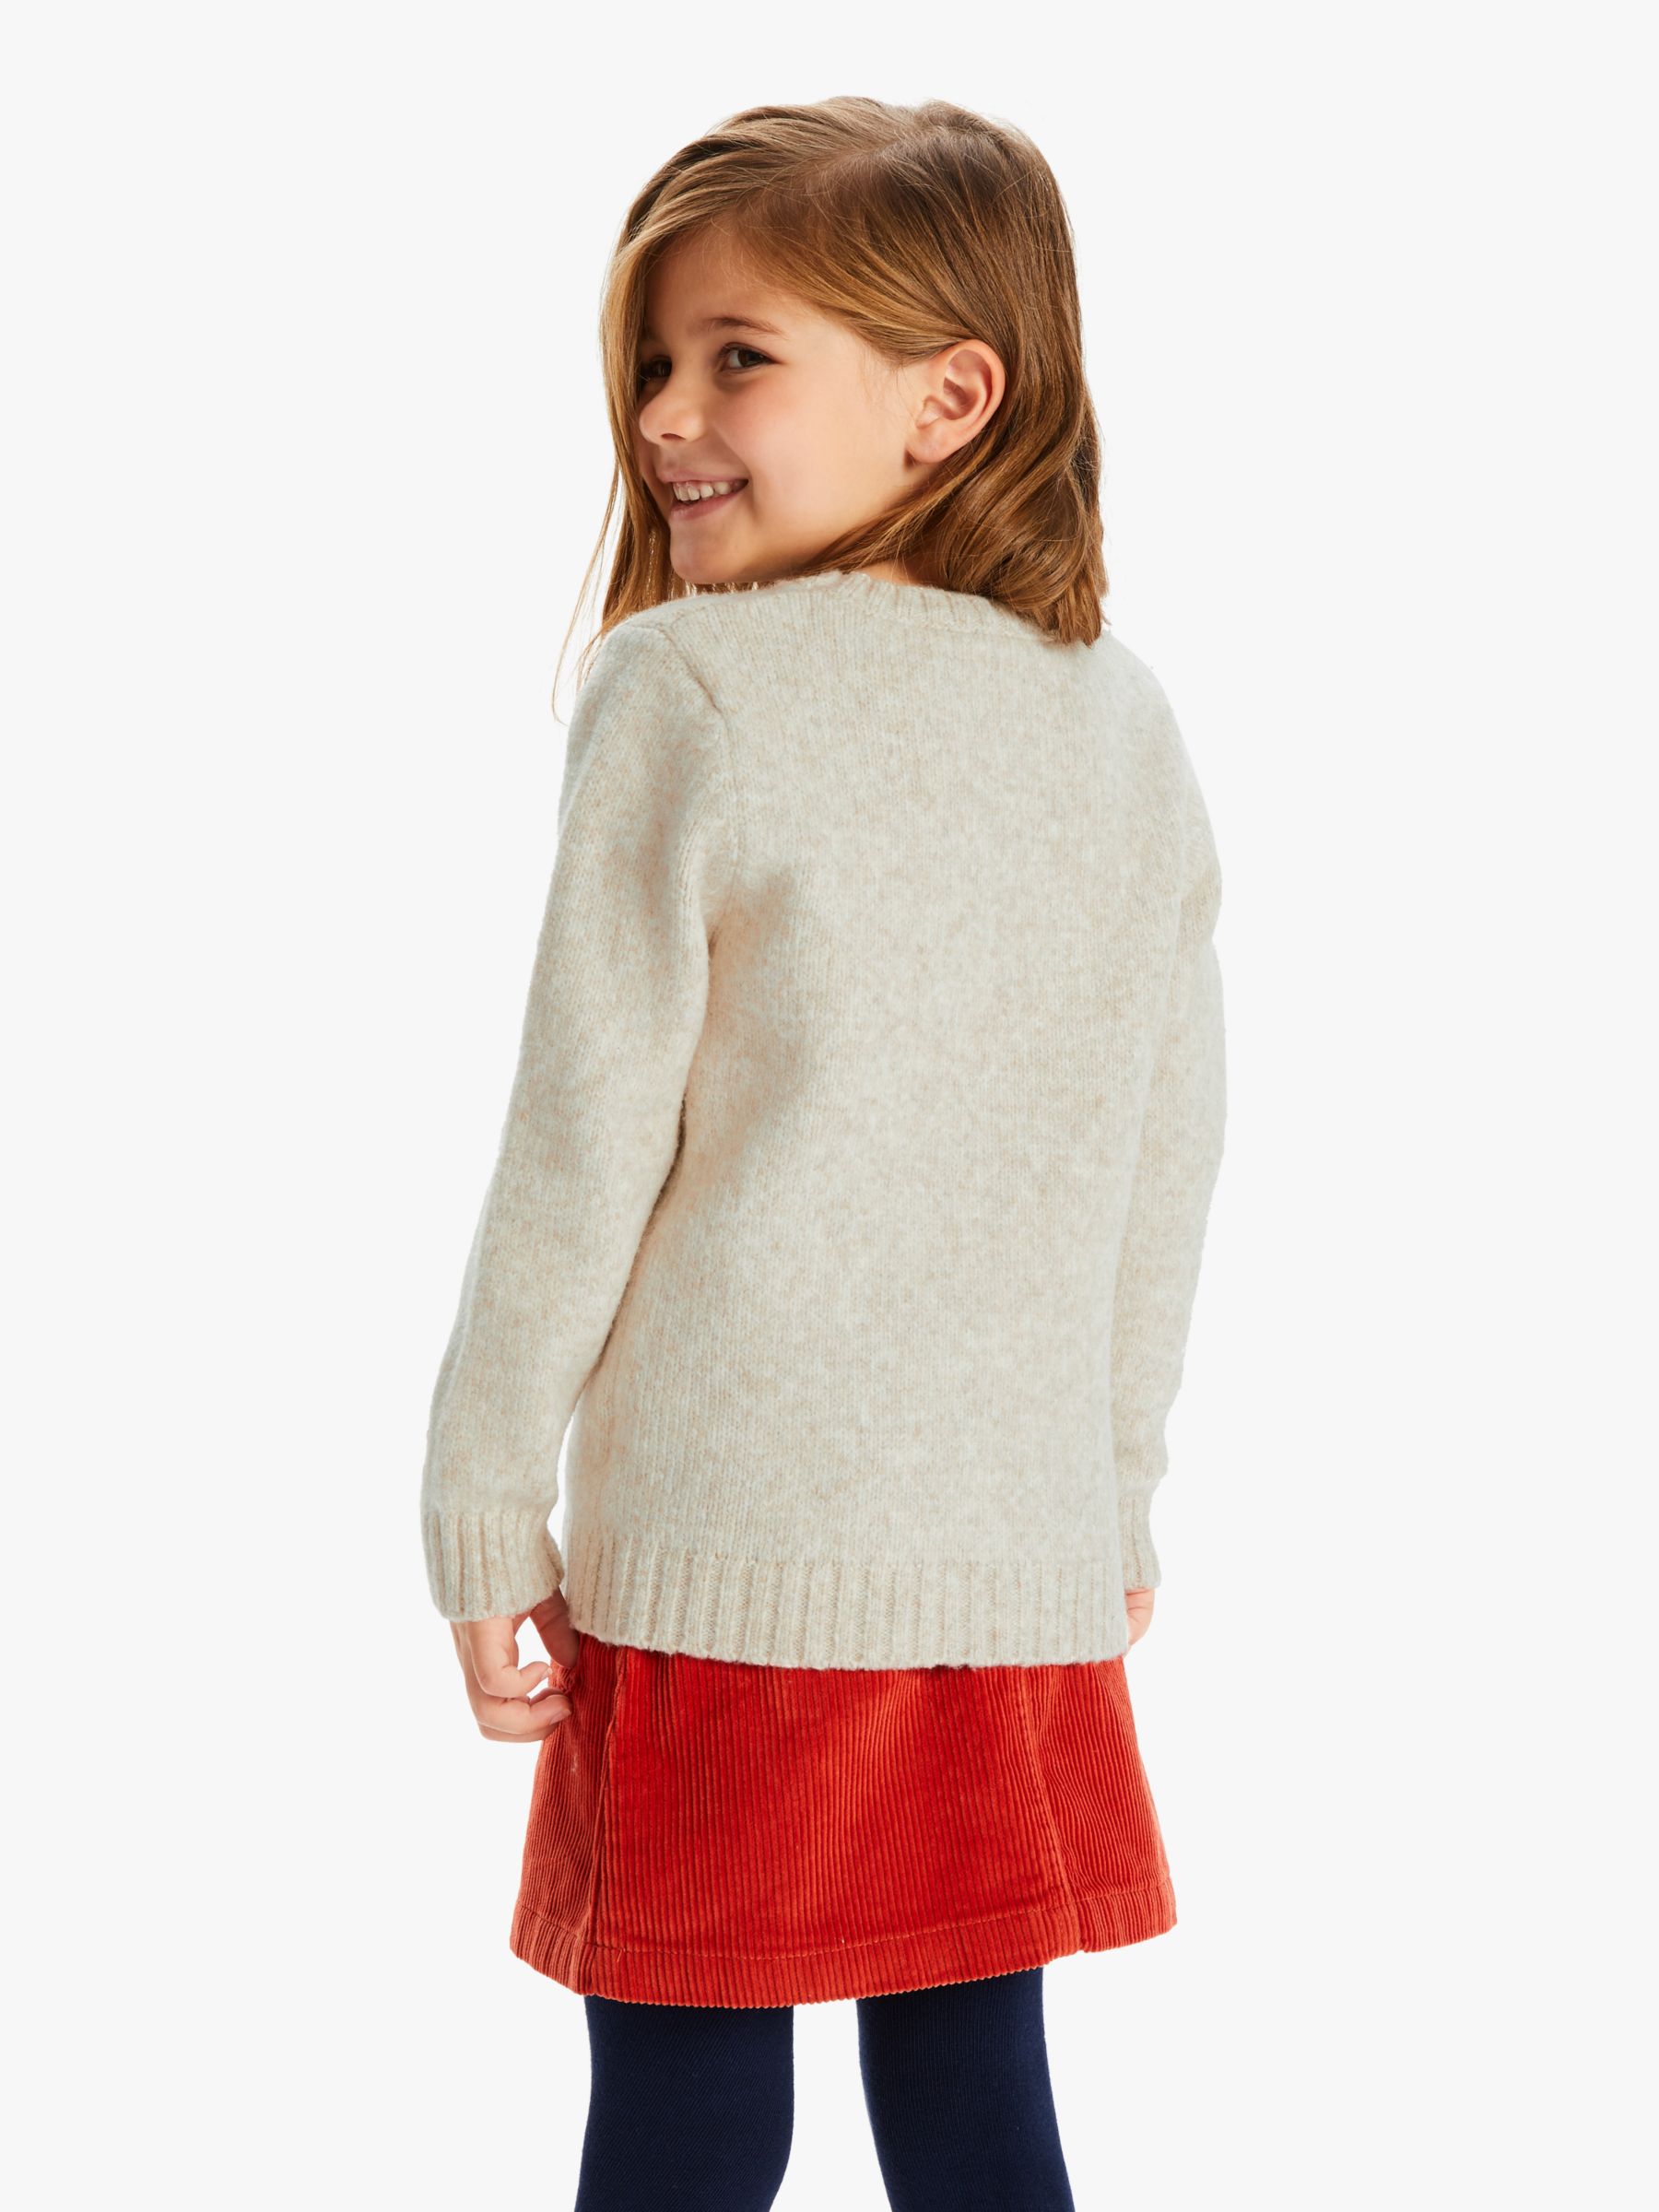 John Lewis & Partners Girls' Floral Embroidered Jumper, Oatmeal